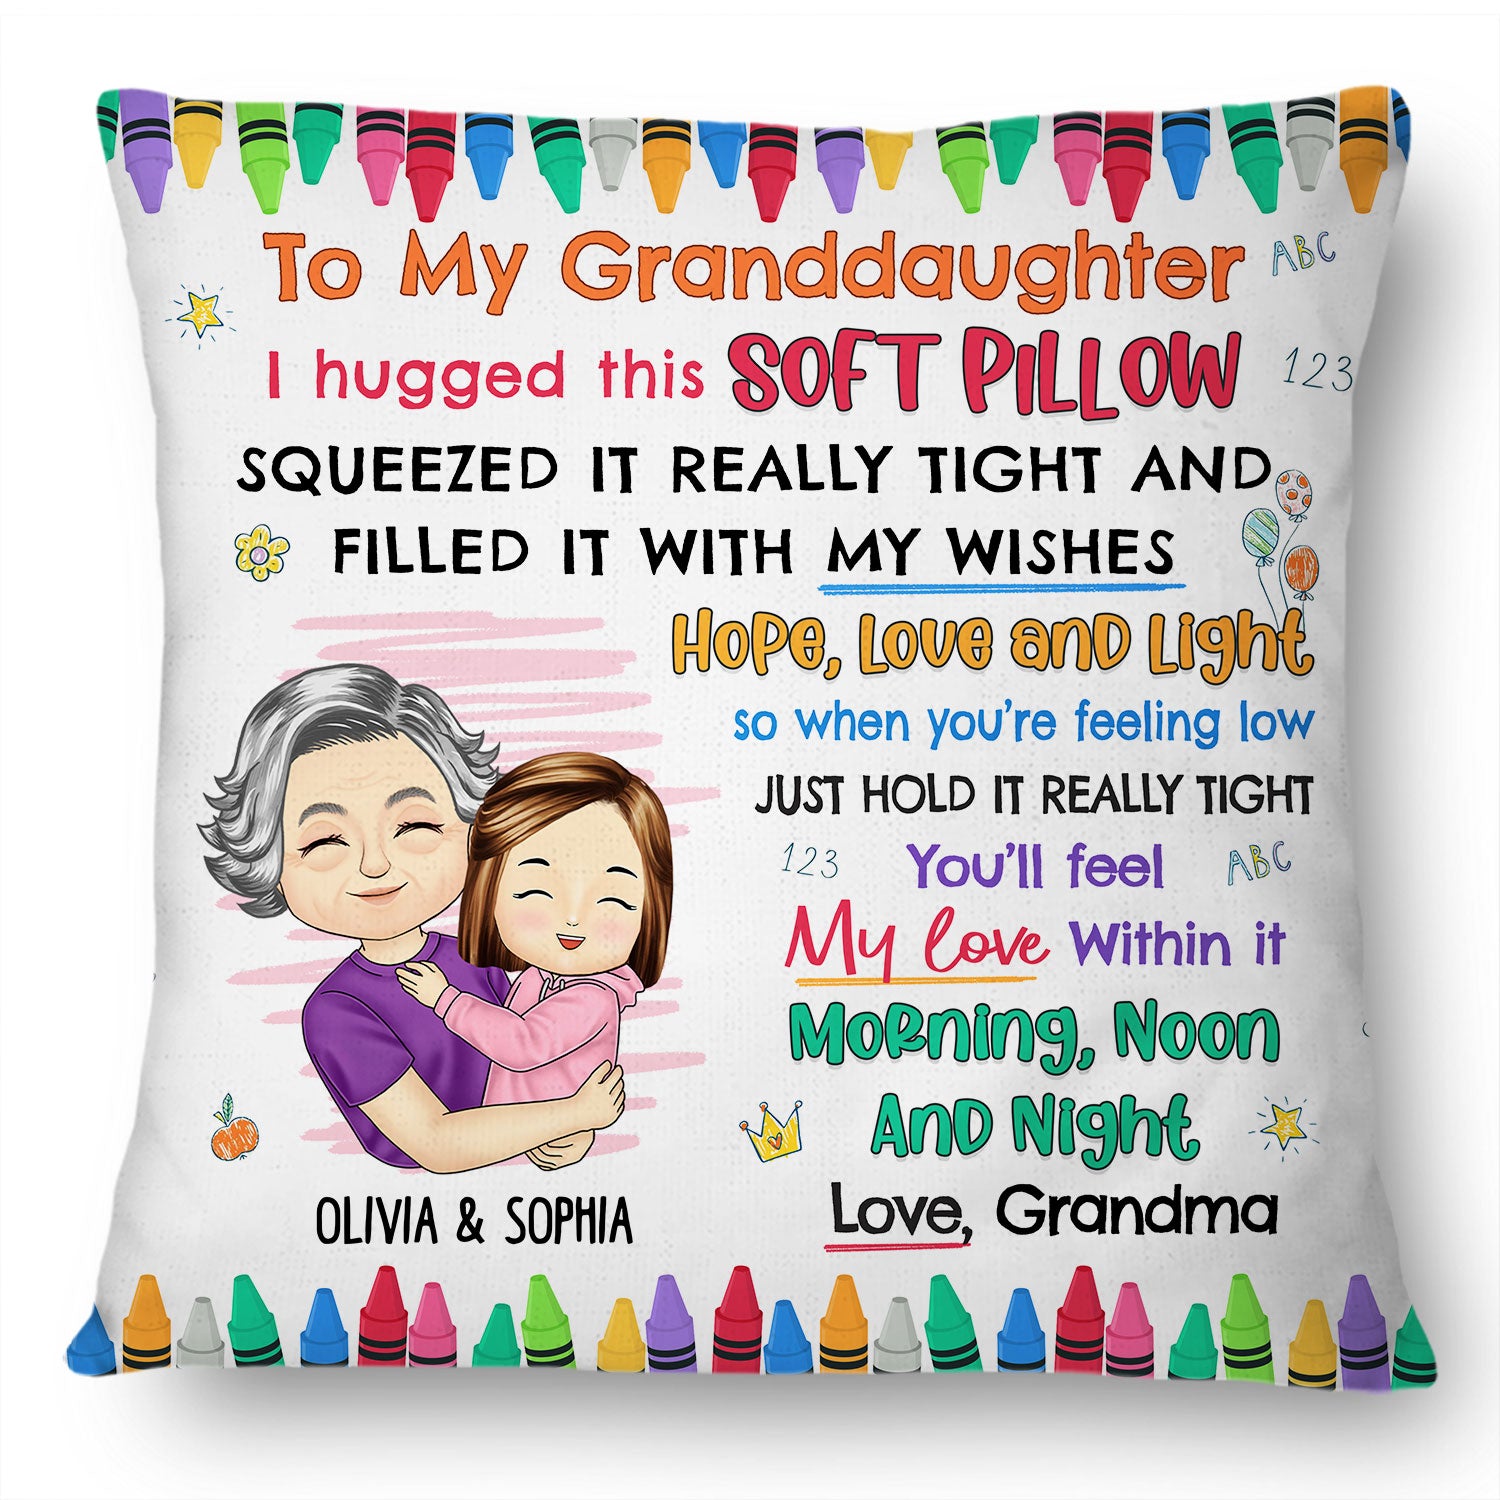 When You're Feeling Low Just Hold It Tightly - Gift For Granddaughter, Grandson, Kids - Personalized Pillow